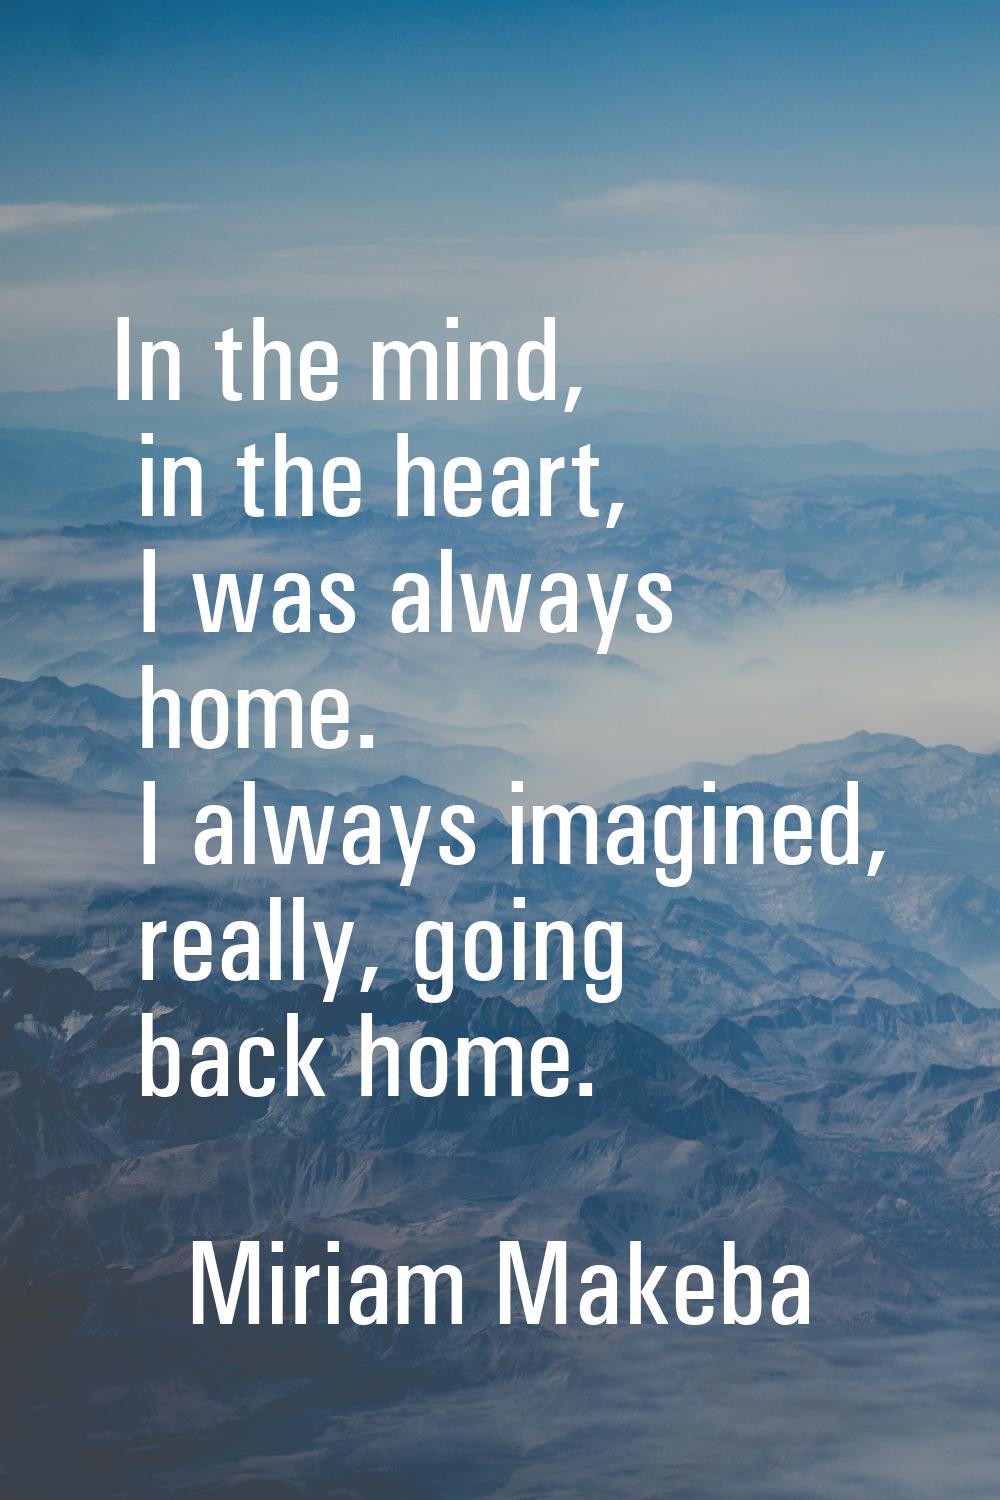 In the mind, in the heart, I was always home. I always imagined, really, going back home.